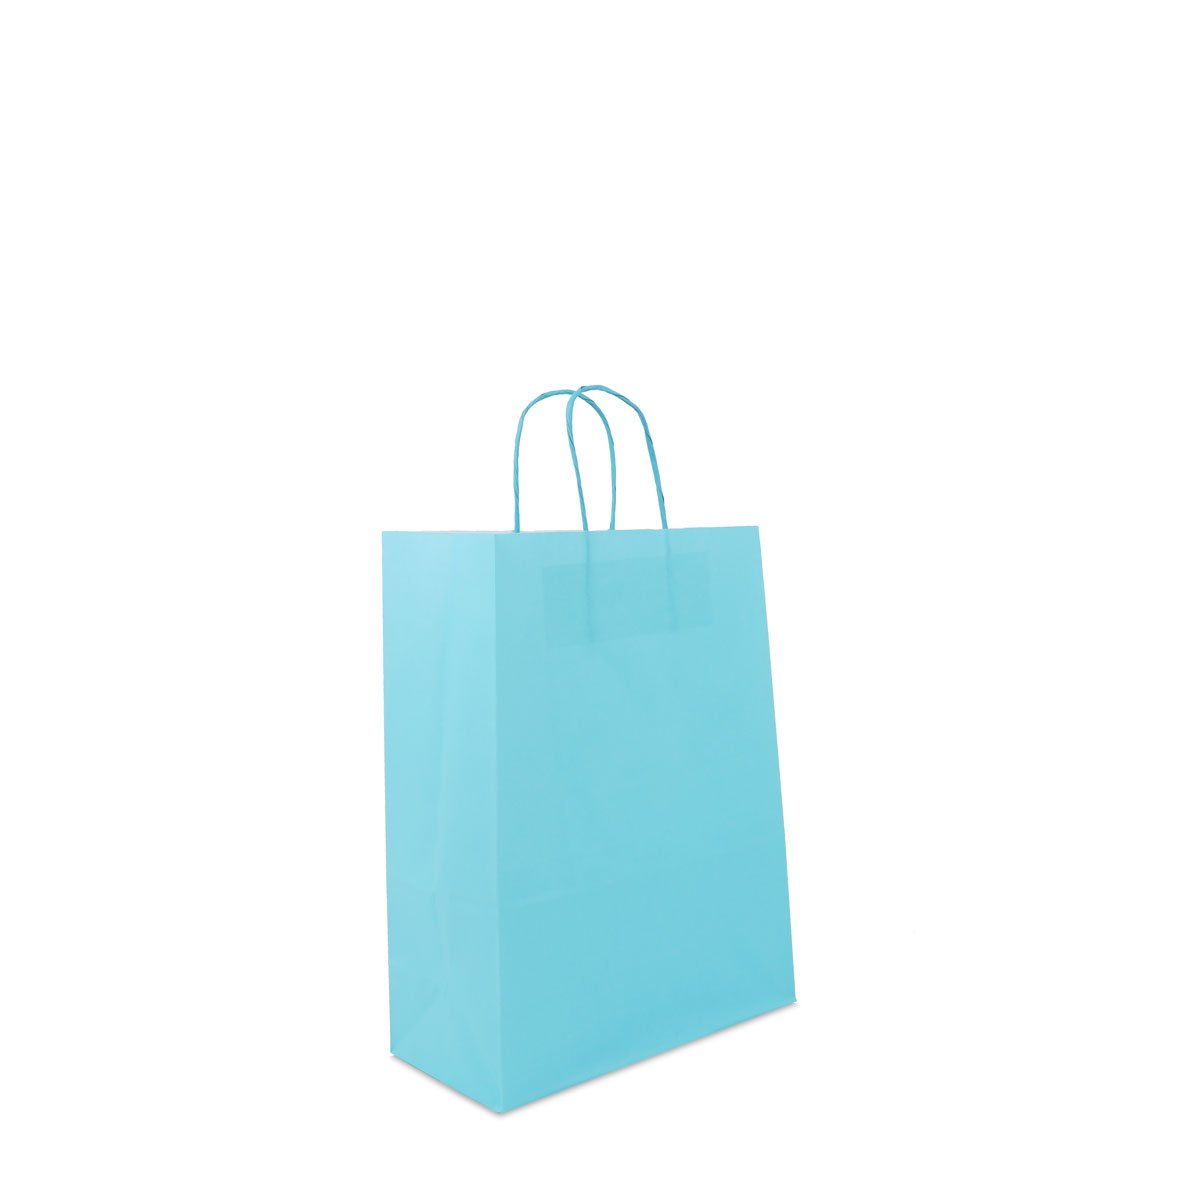 Twisted paper bags - Plain 